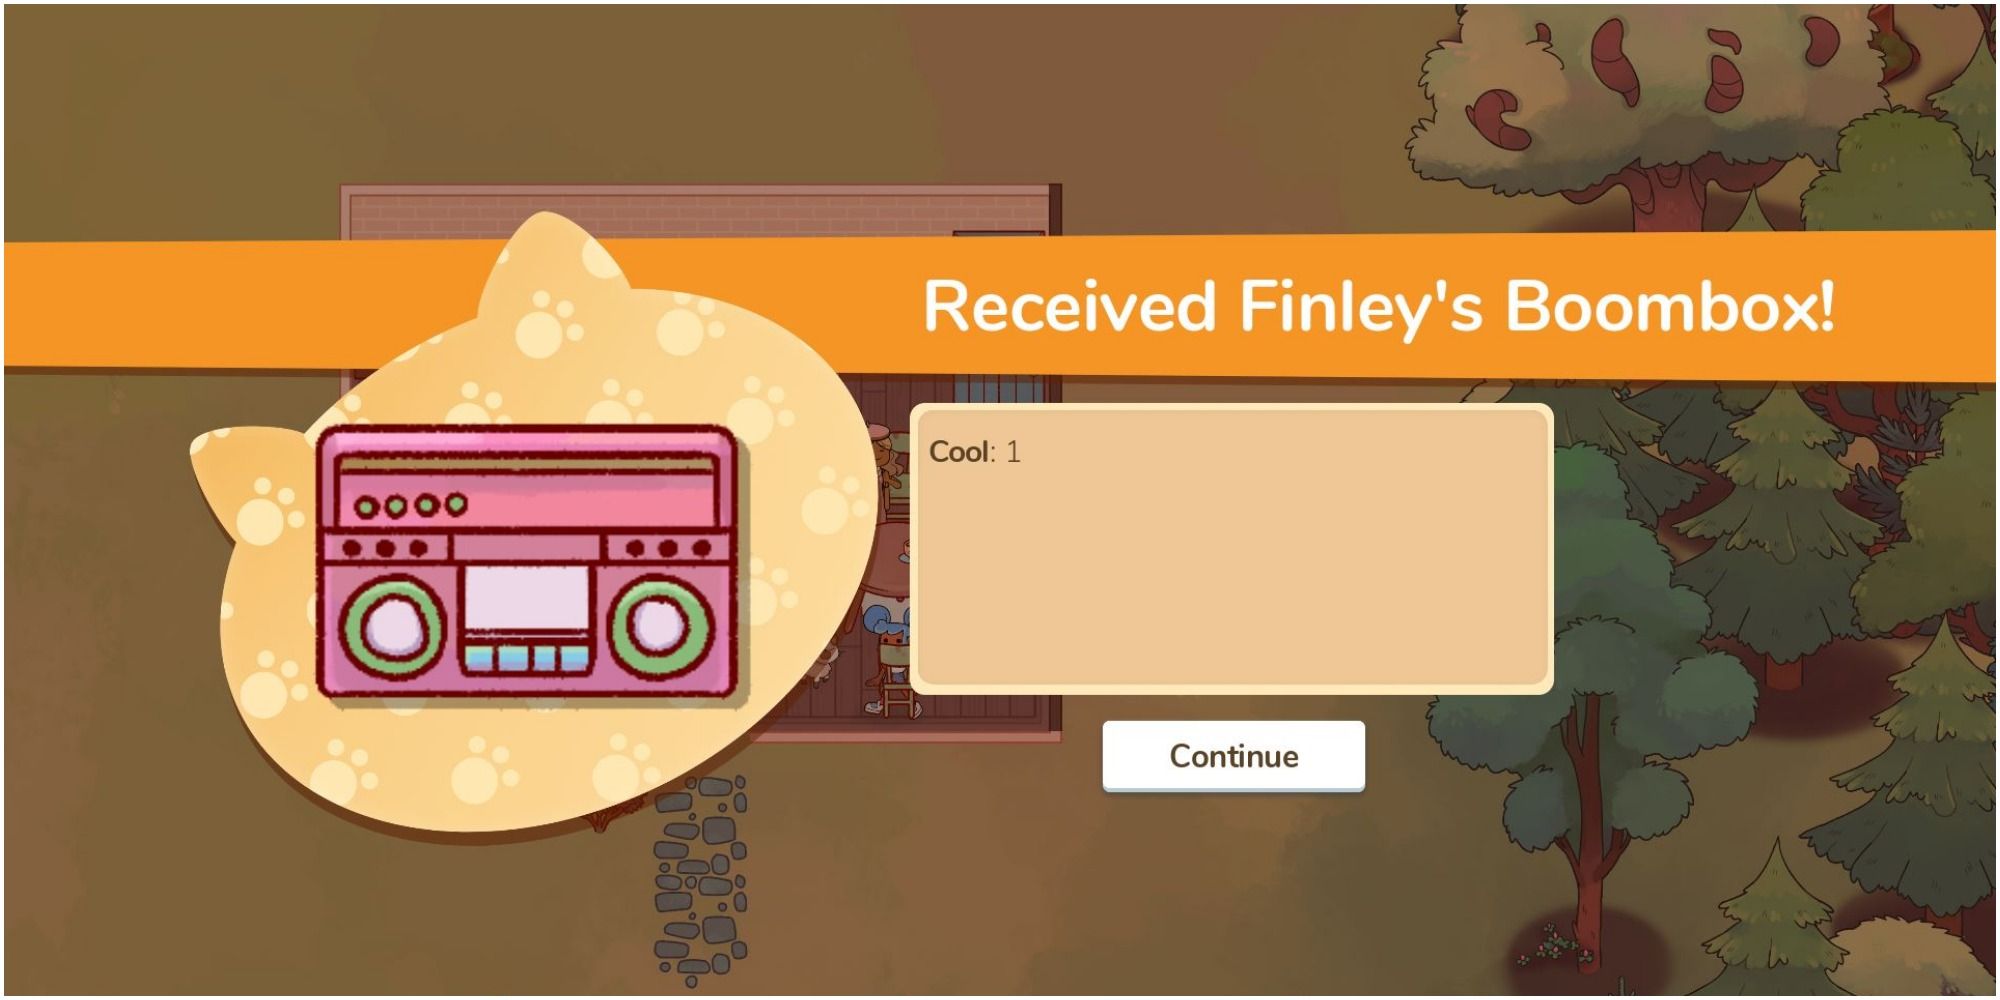 Finley's Boombox showing a stat for plus one cool